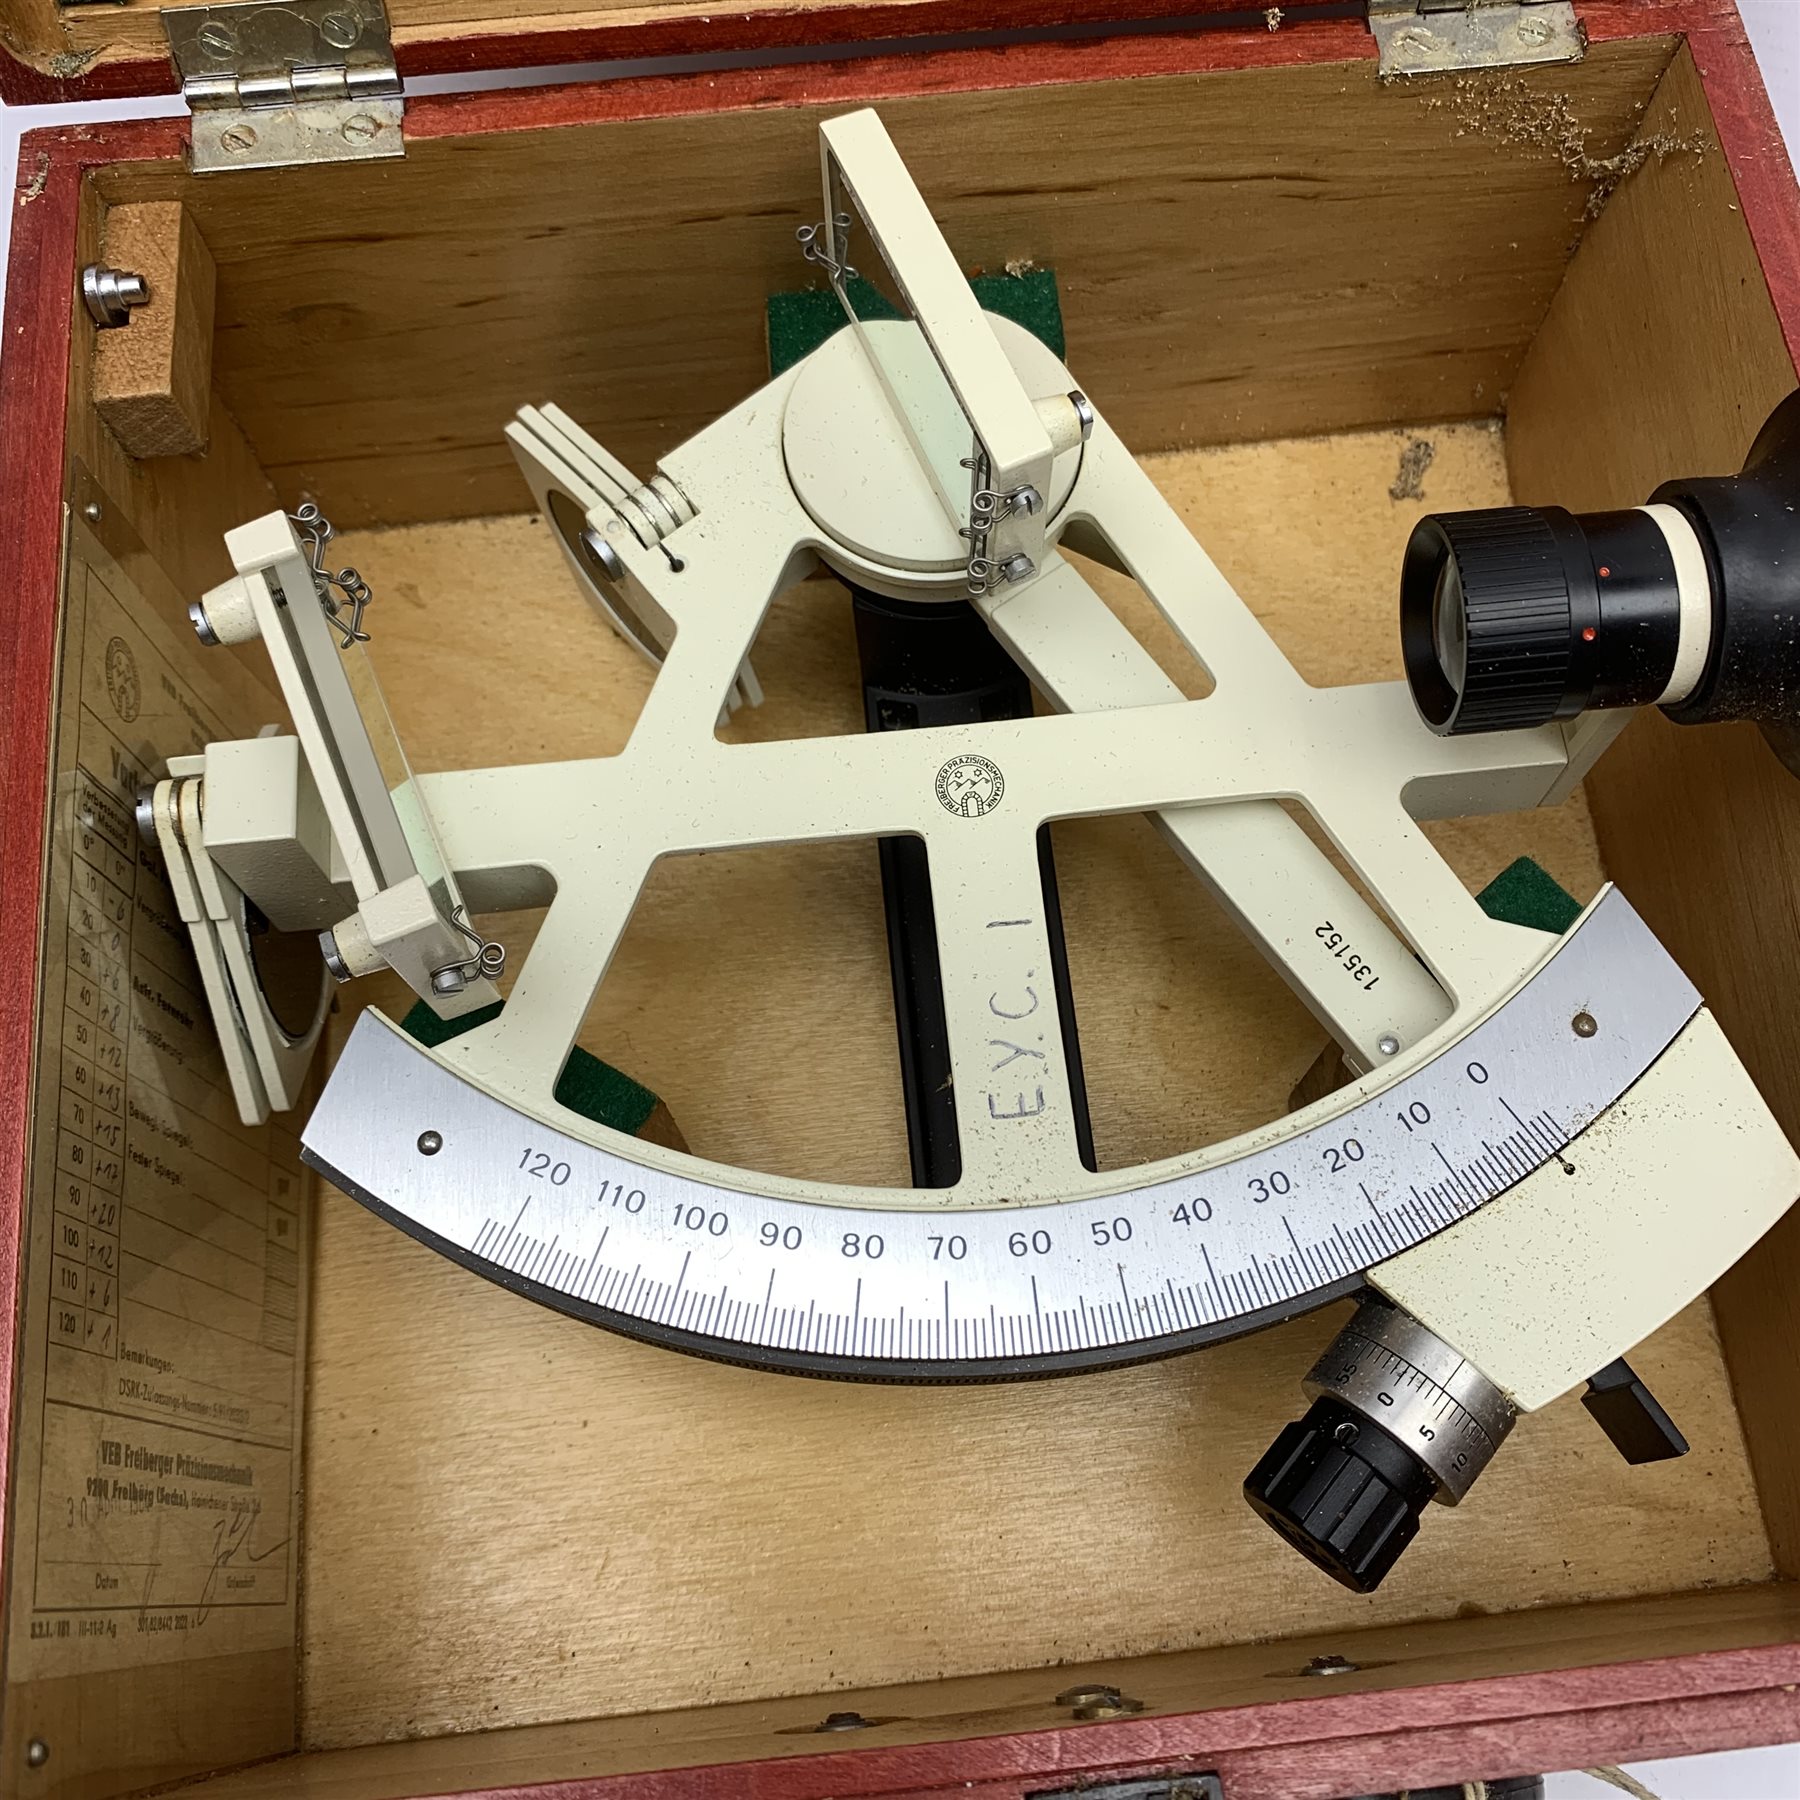 freiberger yacht sextant for sale